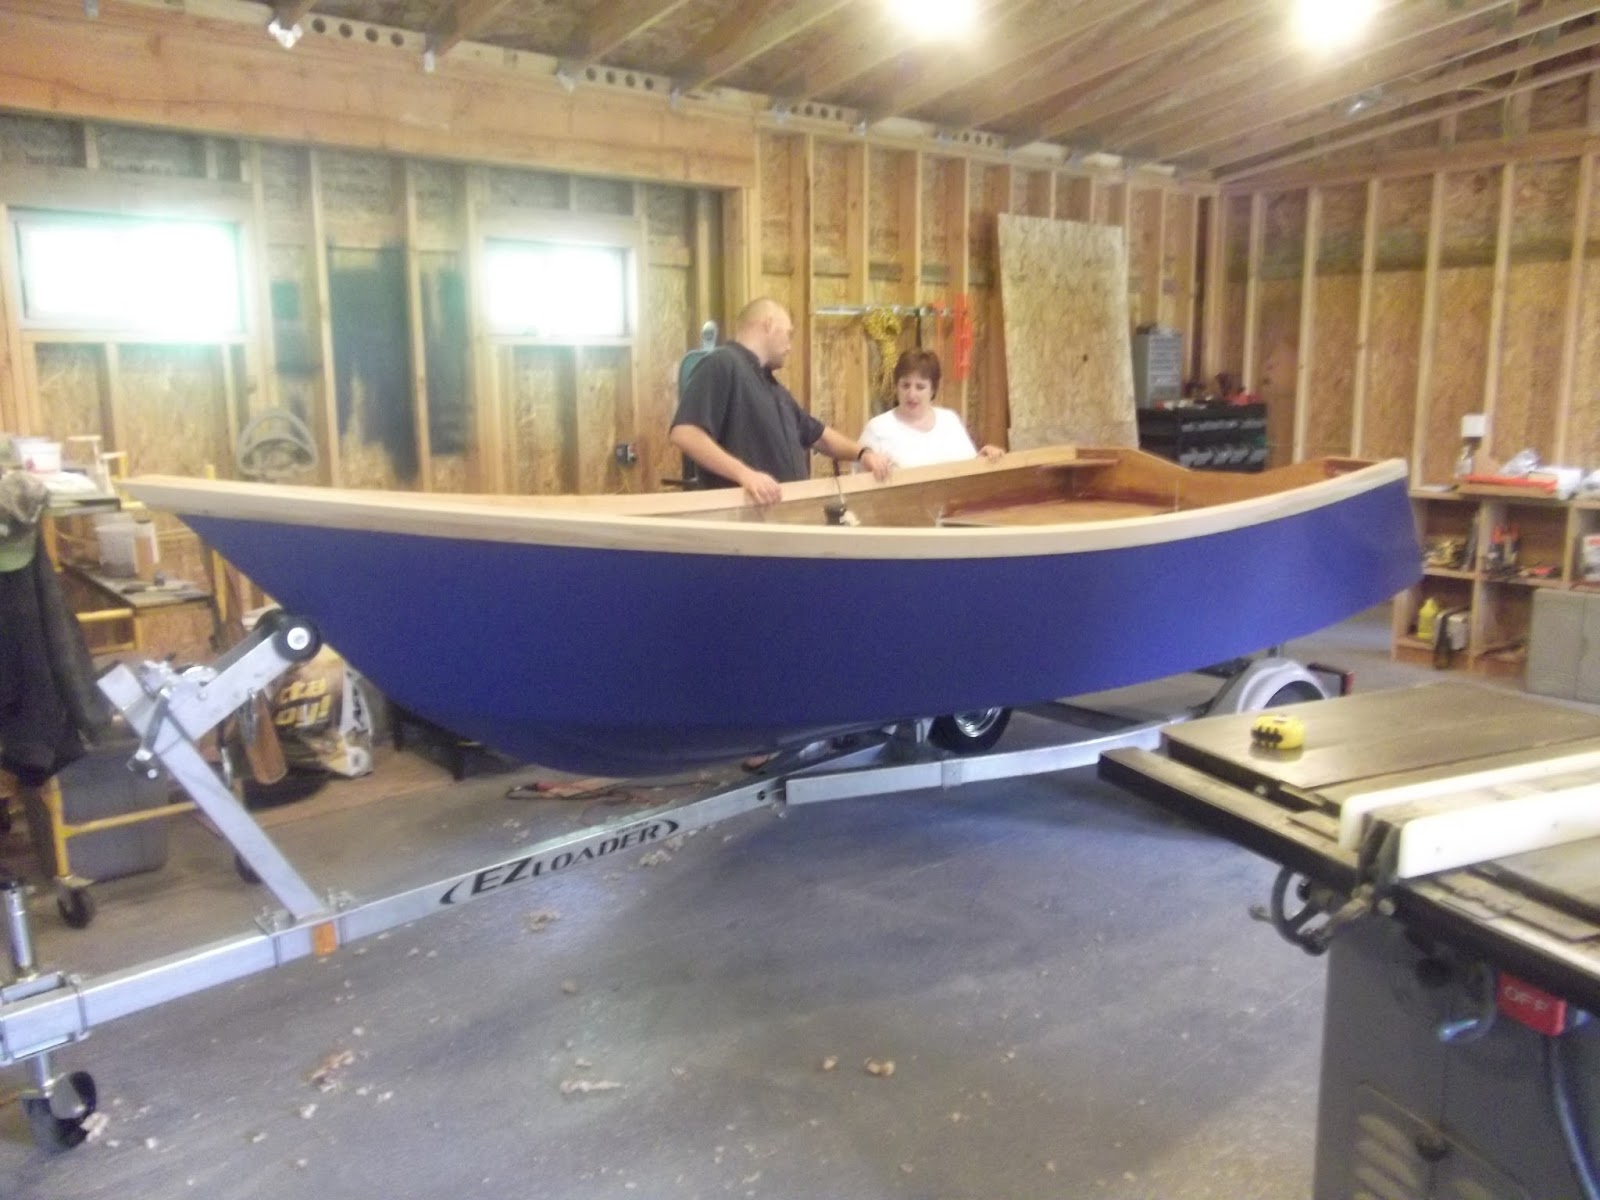 Chris's Boat Project: The Build- 15' Tango Skiff